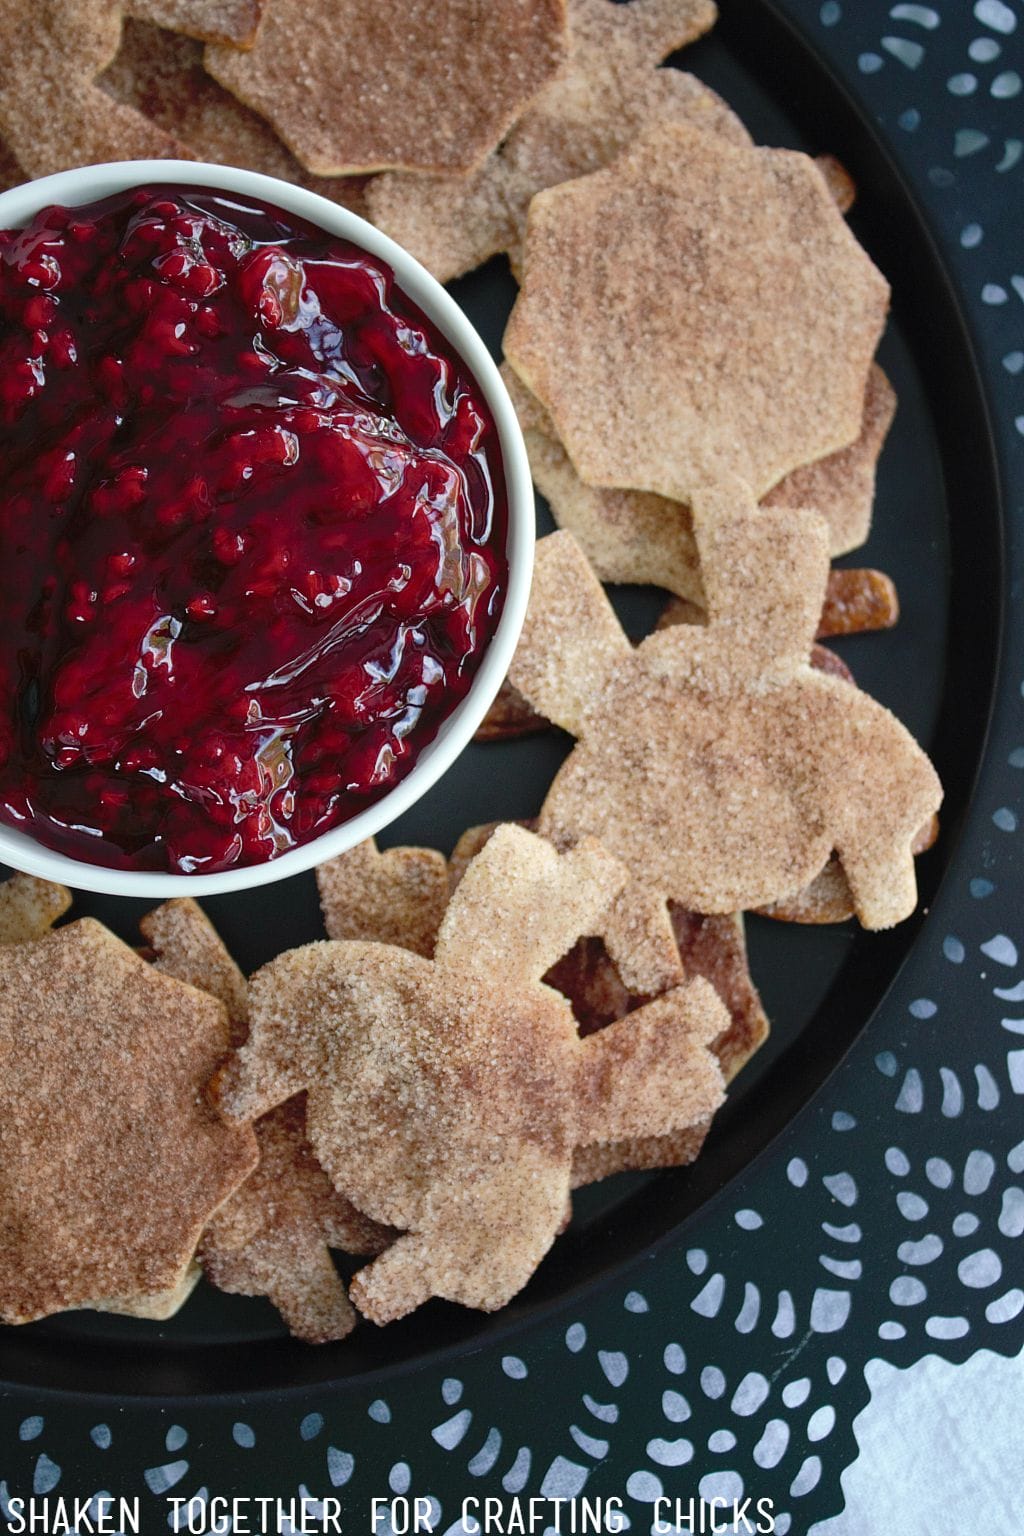 Cinnamon Sugar Spider Chips are perfect to dip in tangy red raspberry 'guts' (raspberry pie filling)!